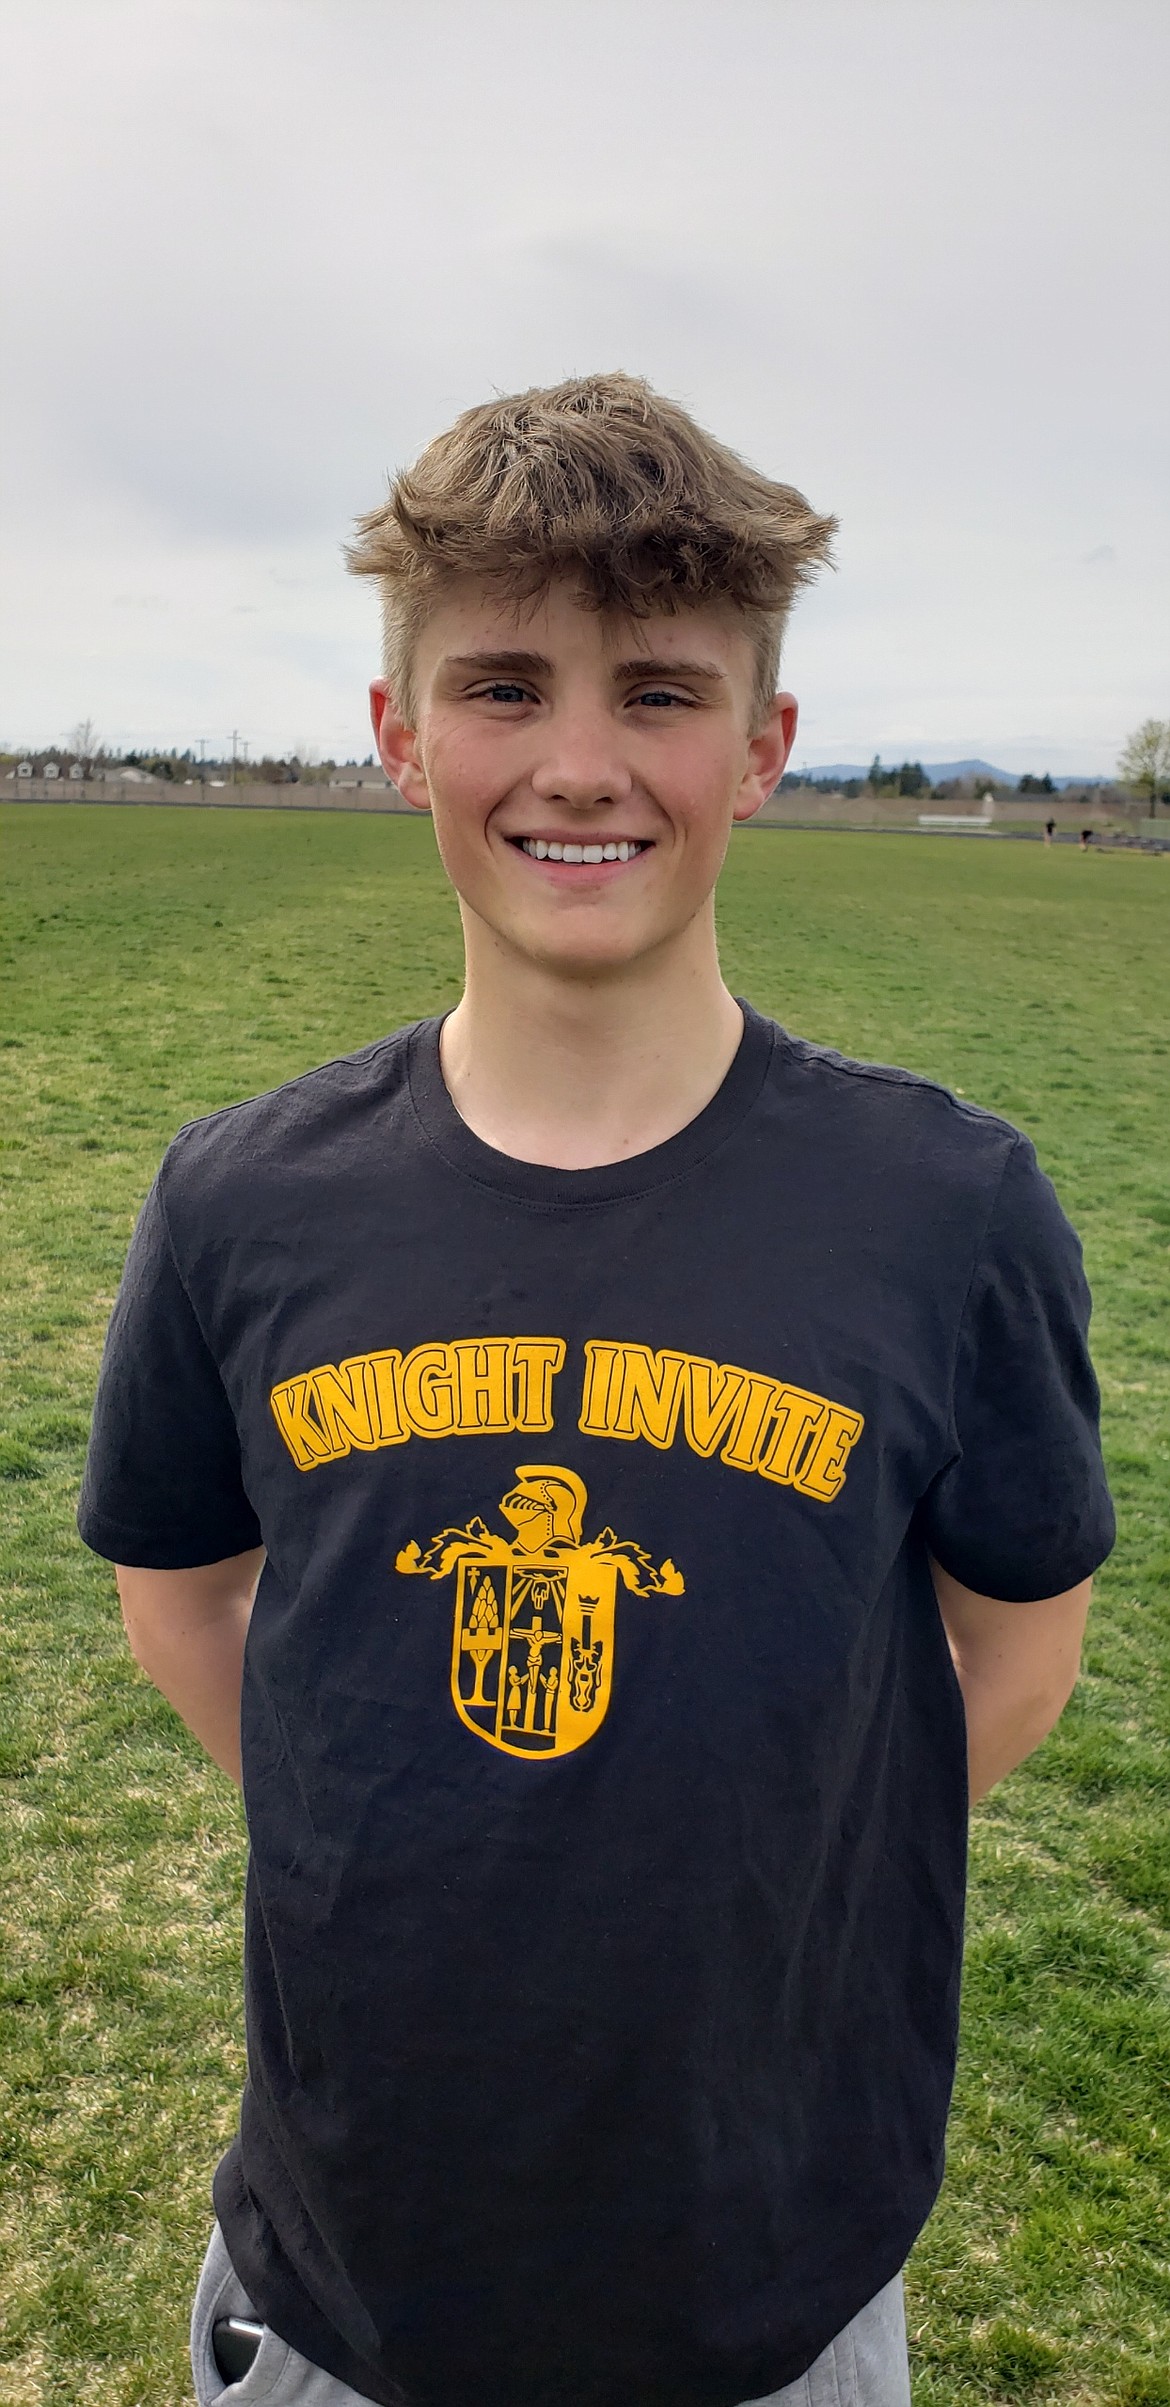 Senior track and field athlete Dalton Wild is this week's Post Falls High School Athlete of the Week: Wild won the 100-meter dash and placed second in the 200-meter dash at the Knight Invitational at Bishop Kelly High School. Wild set a school record in the 100-meter dash preliminaries with a time of 10.95.